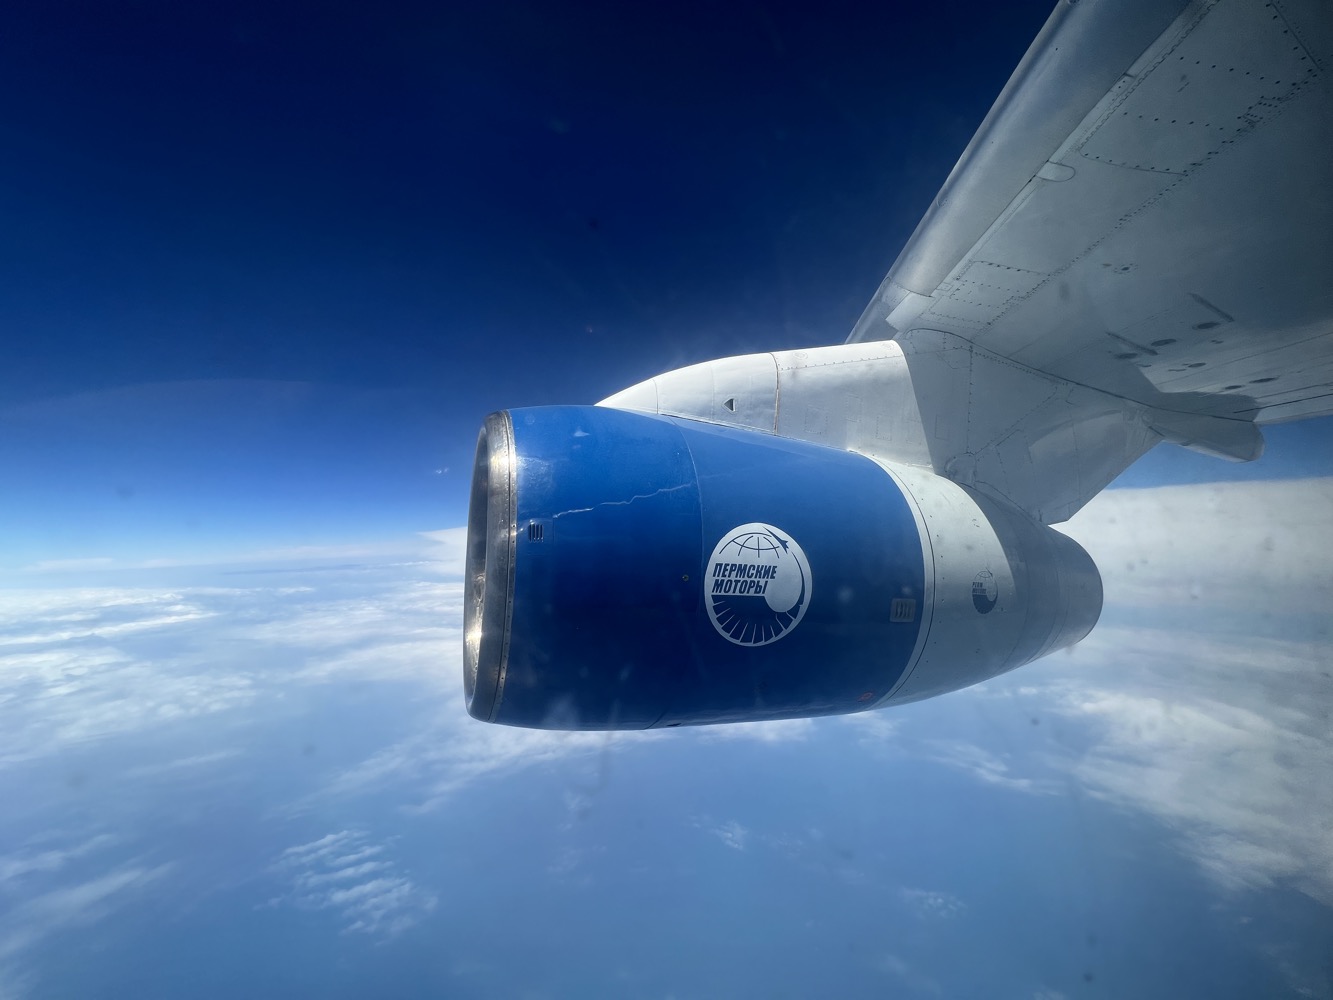 an airplane wing with a blue and white engine